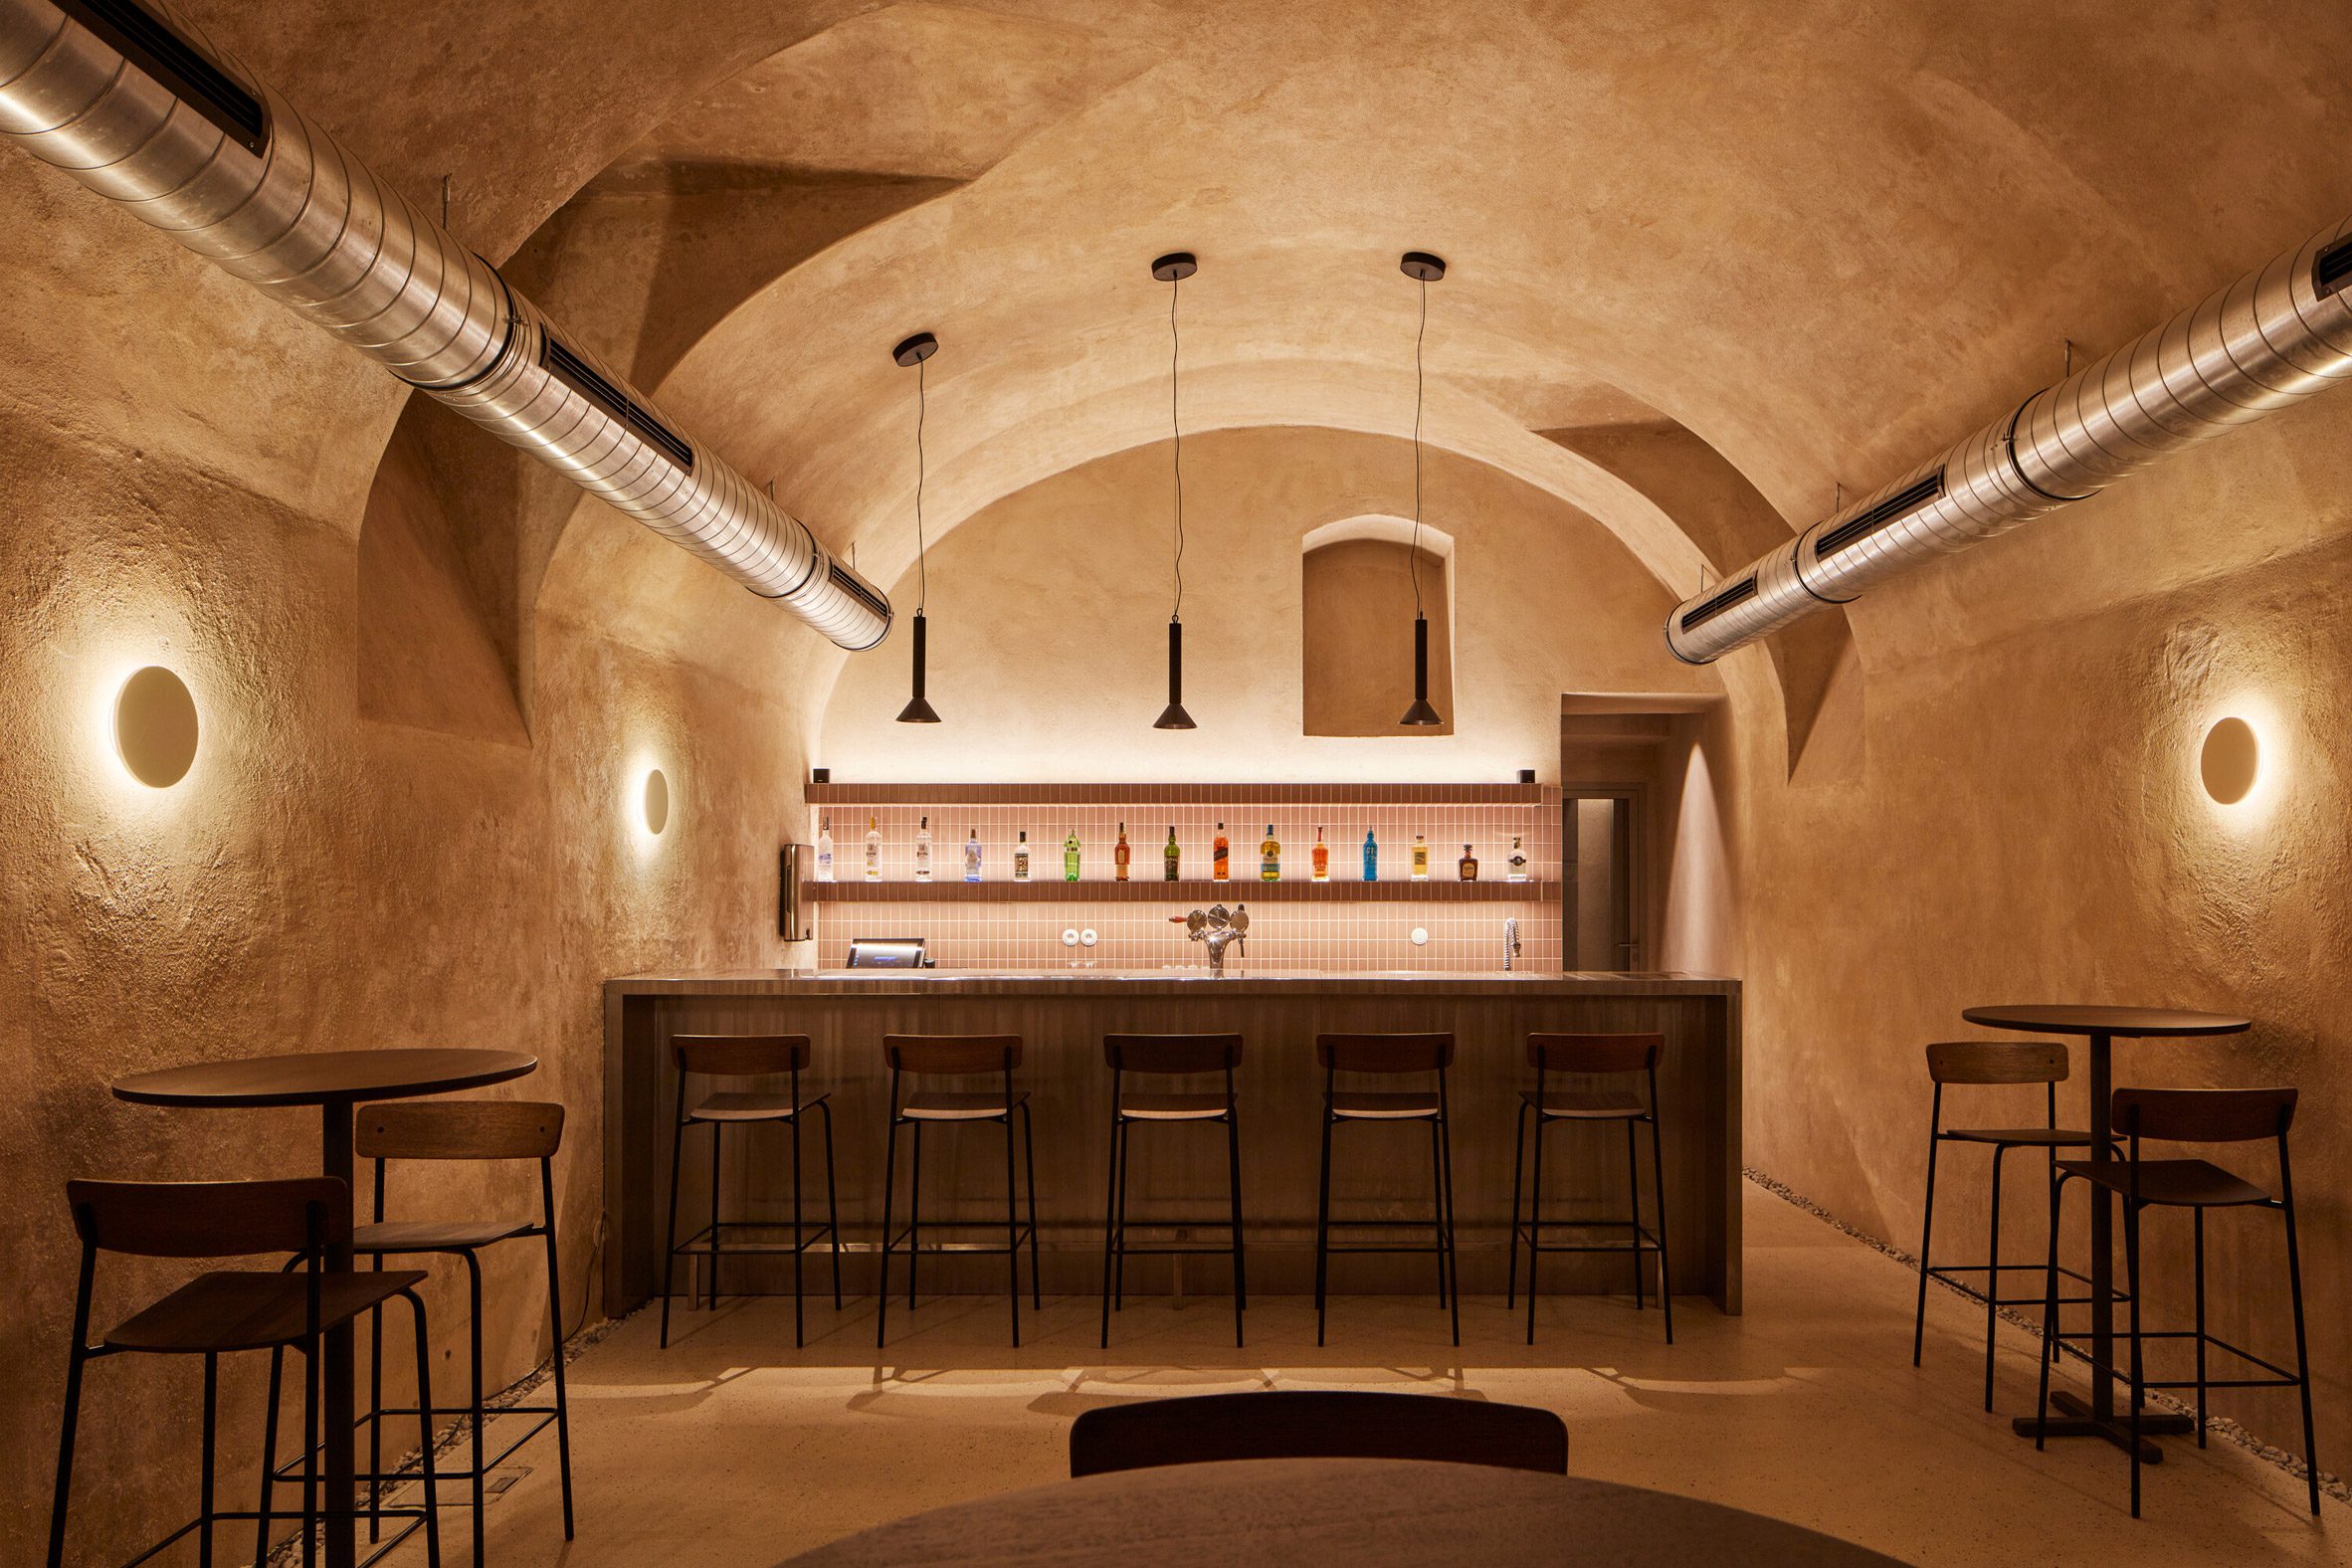 Bar at the end of a vaulted room